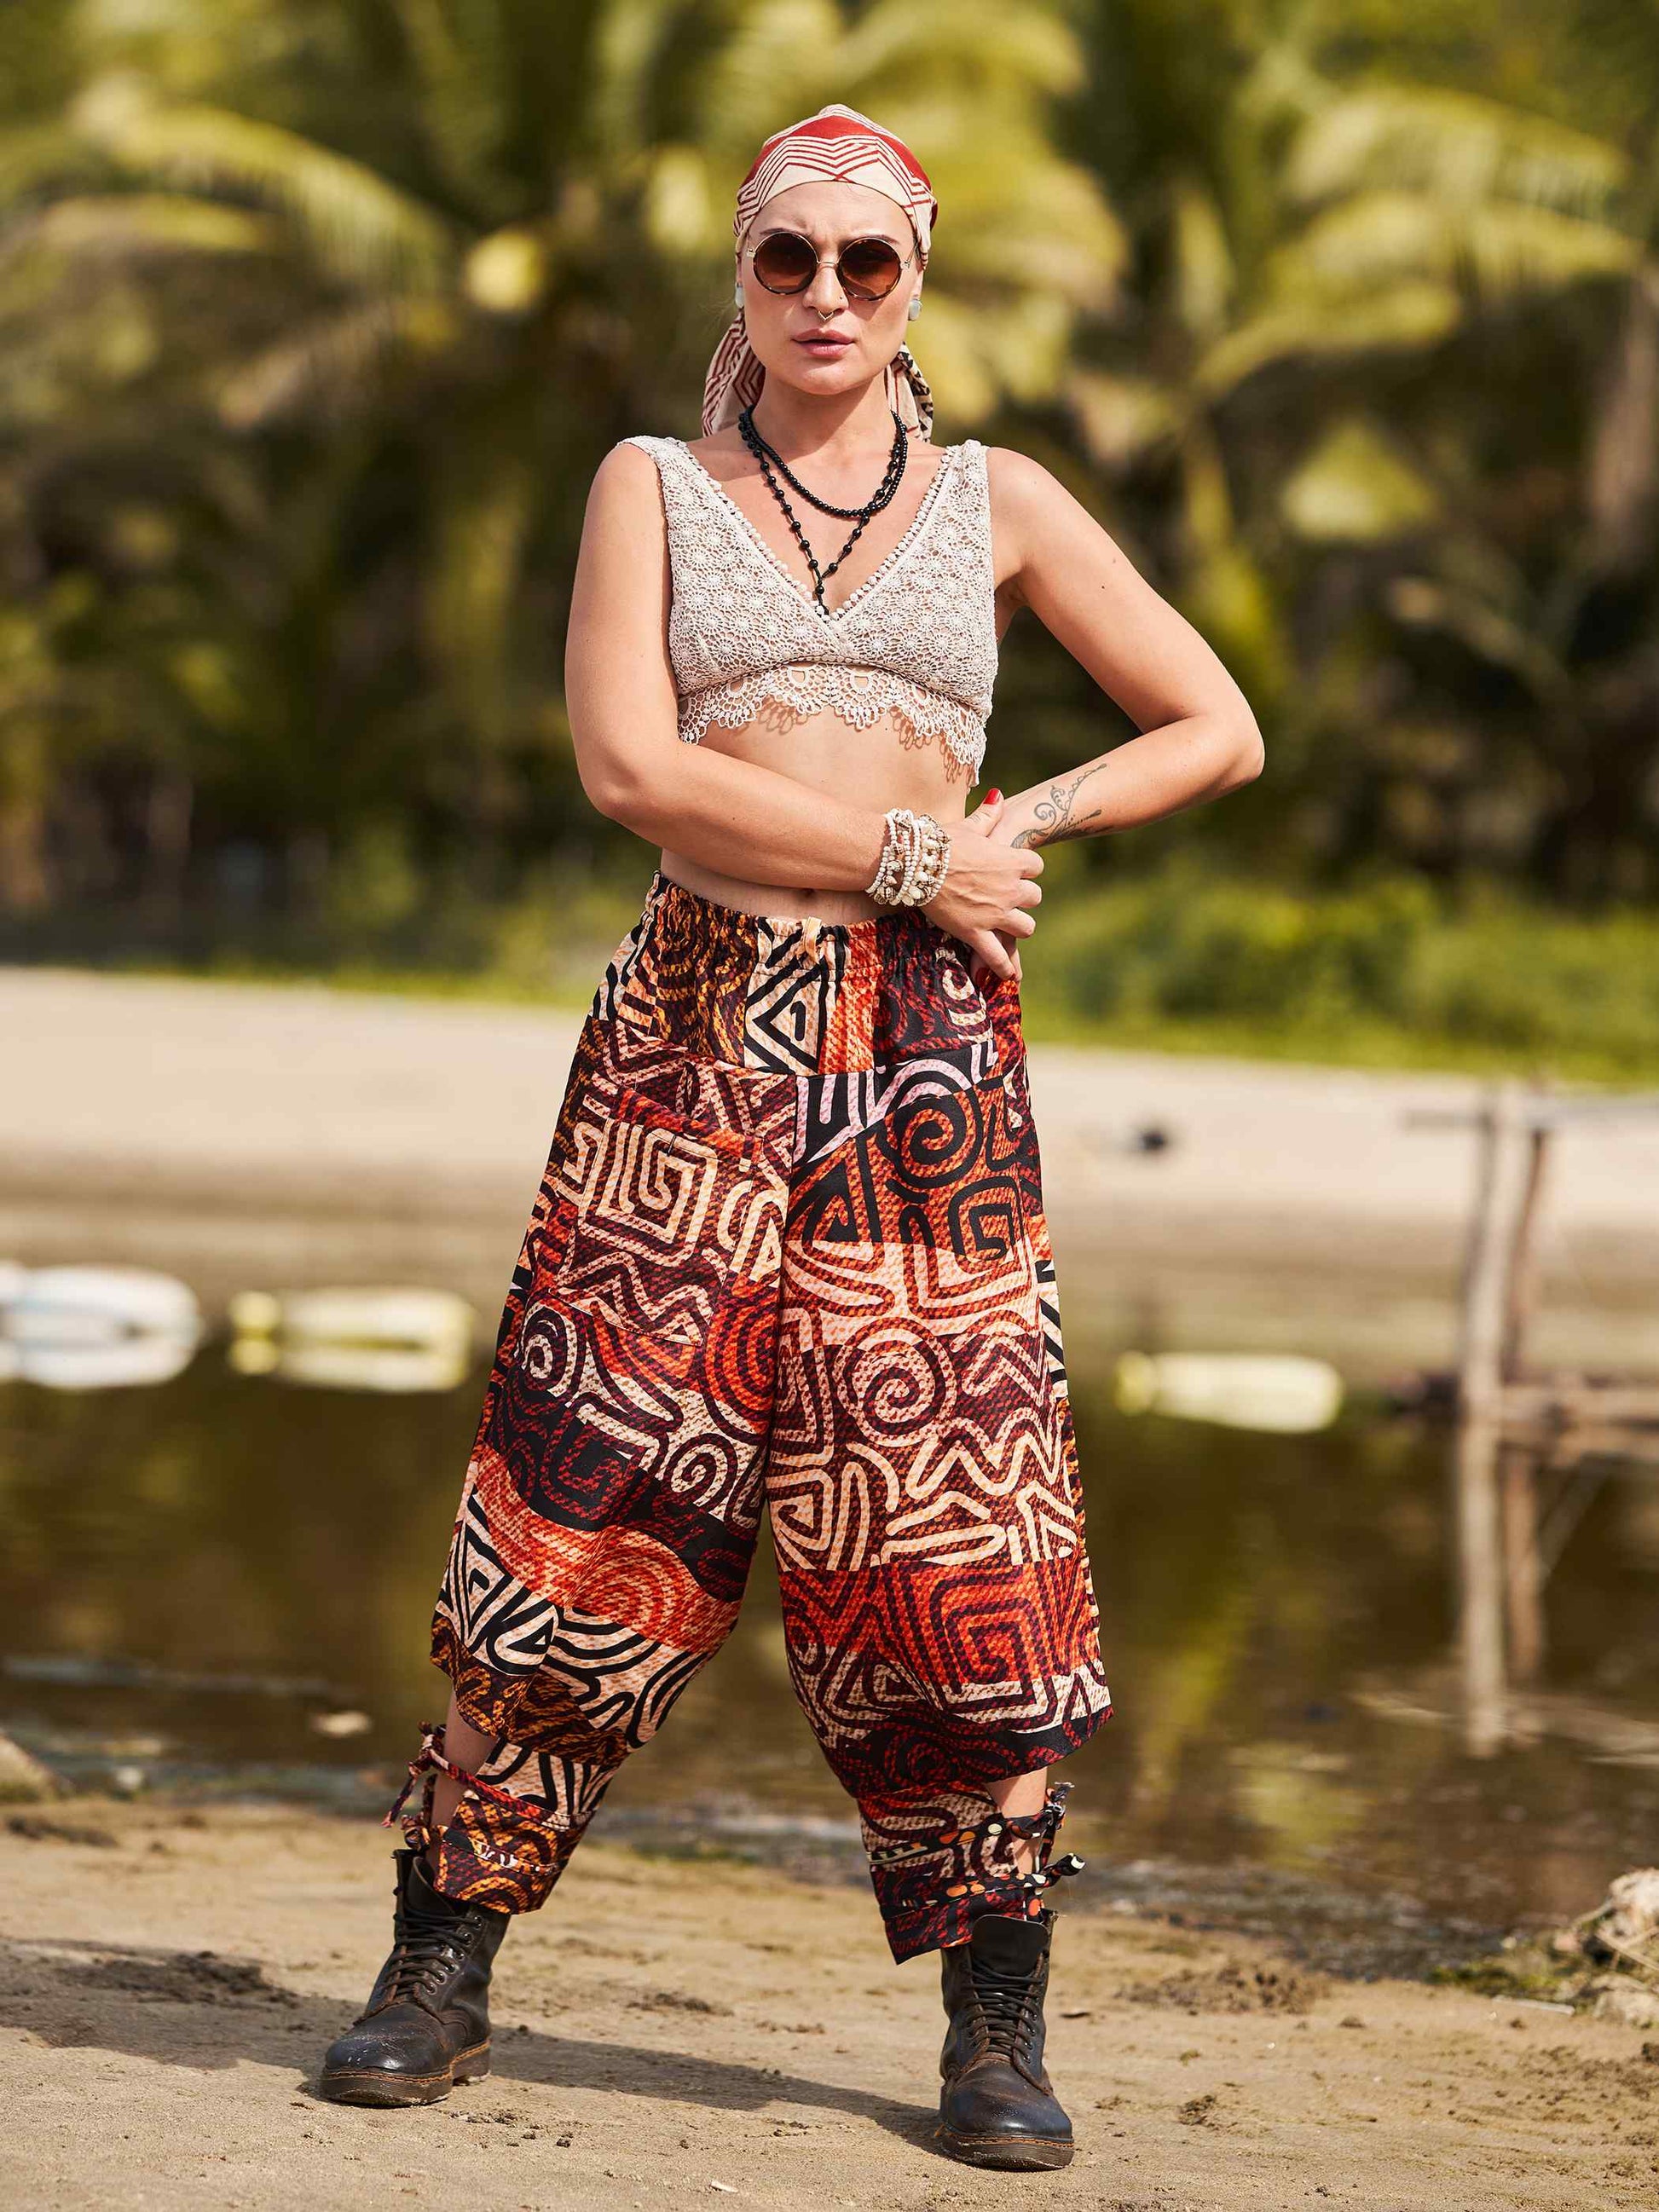 Buy Women's Flowy Graphic Printed Hippy Harem Pants For Travel